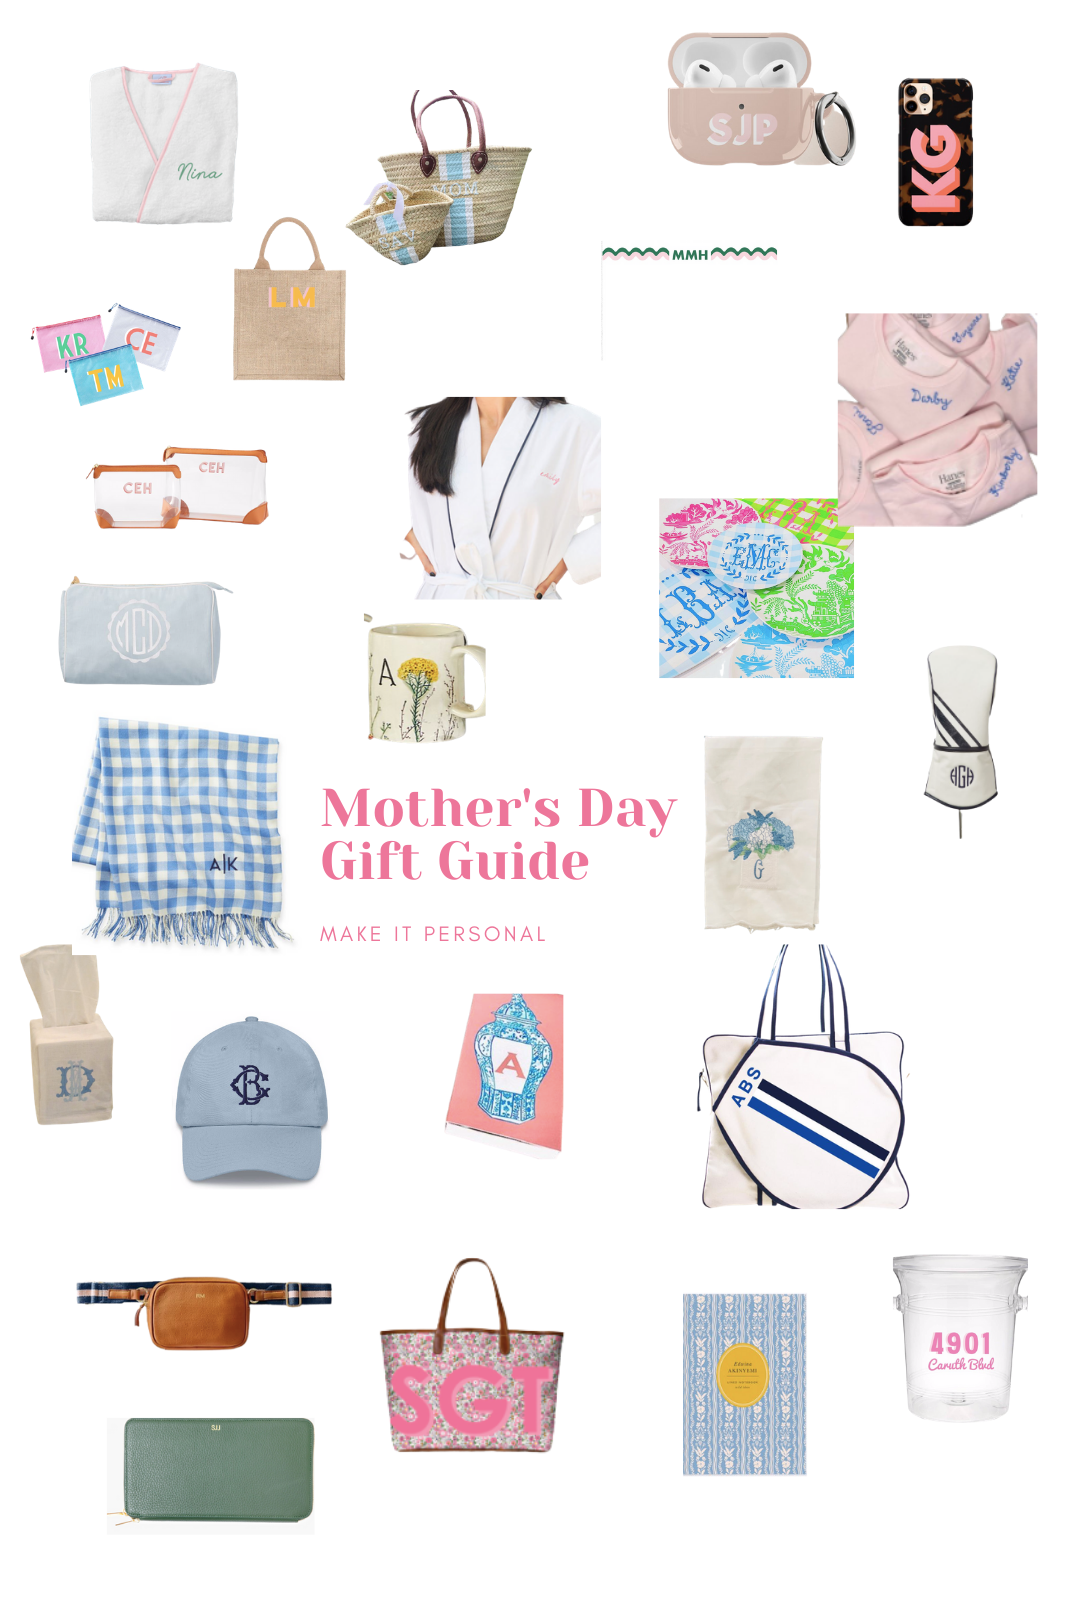 https://sarah-tucker.com/wp-content/uploads/2021/04/Mothers-Day-Gift-Guide.png